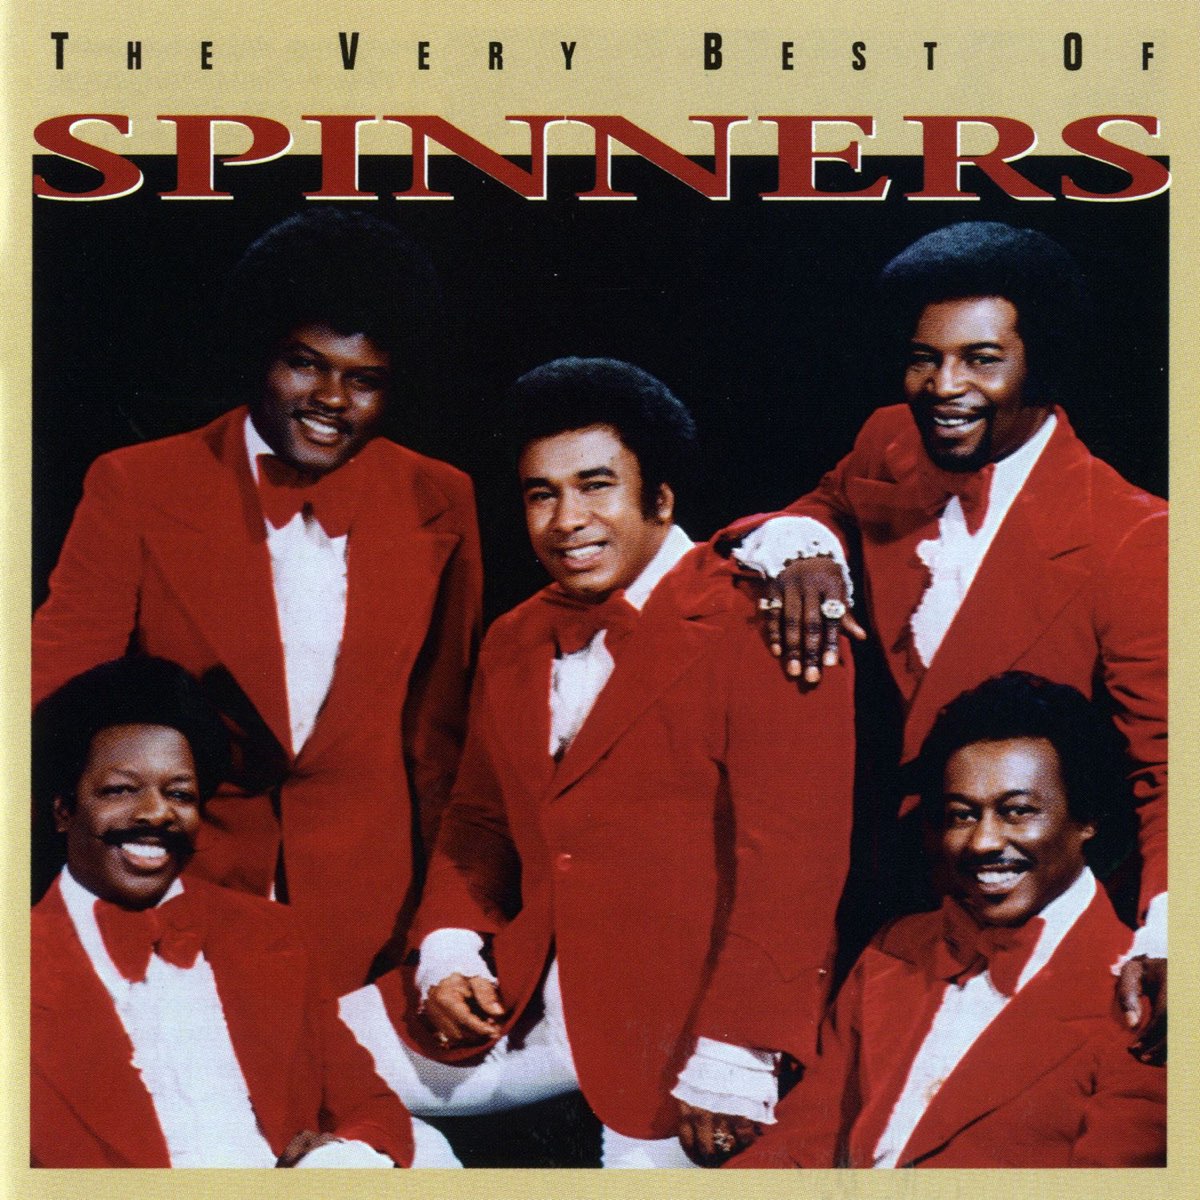 ‎The Very Best of the Spinners - Album by The Spinners - Apple Music